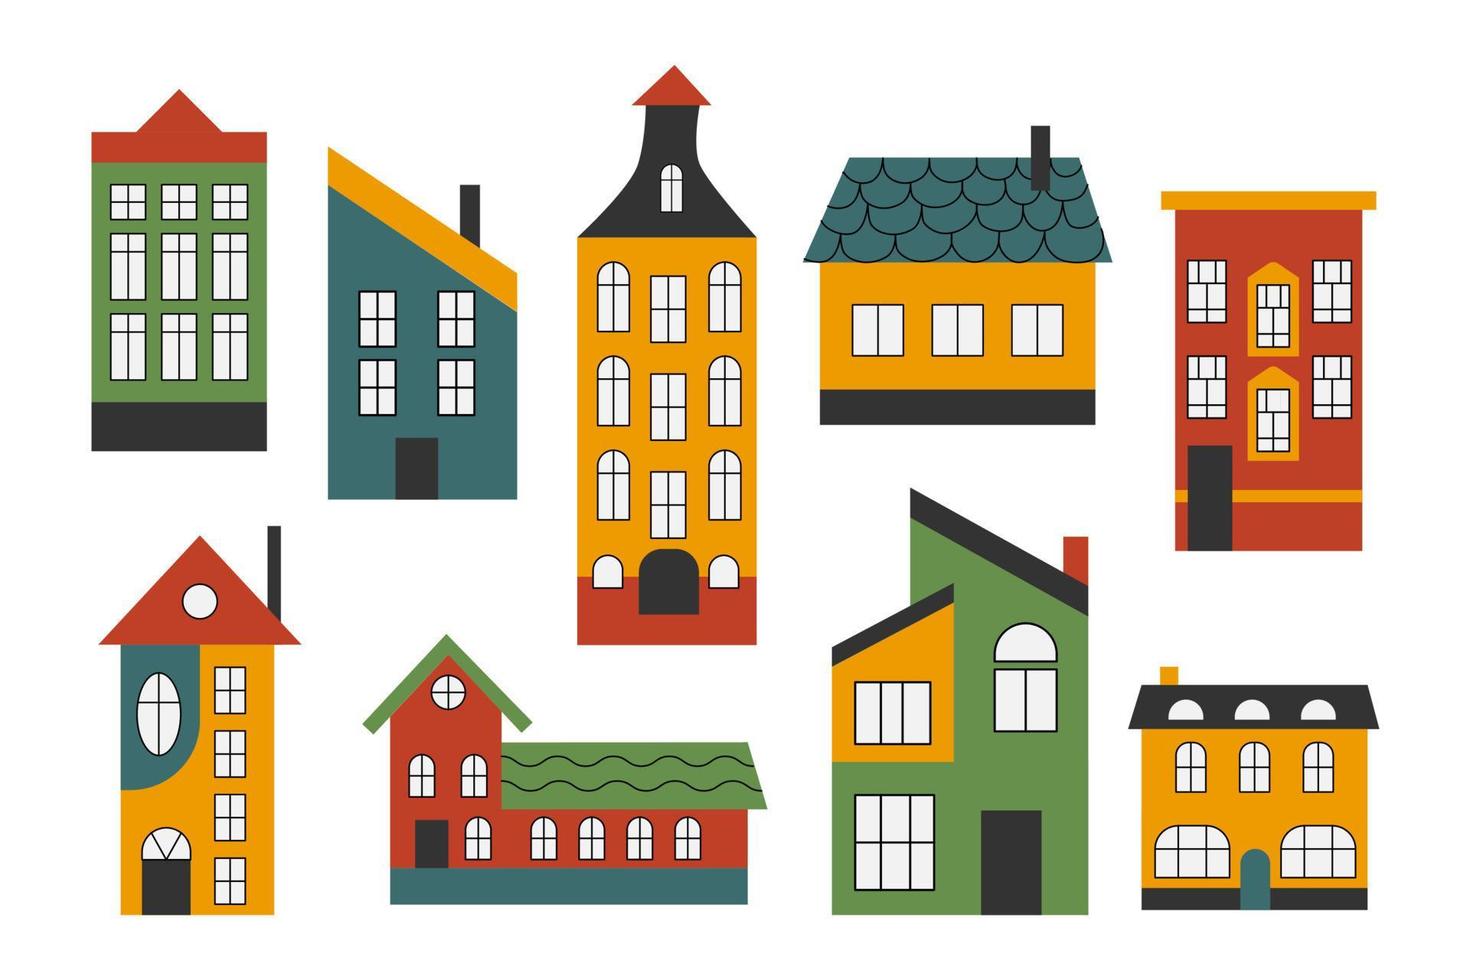 A set of colorful flat style houses.Buildings with Scandinavian style windows. Fancy town and country houses with windows, roof tiles and chimneys with smoke. Cute country tiny houses. vector